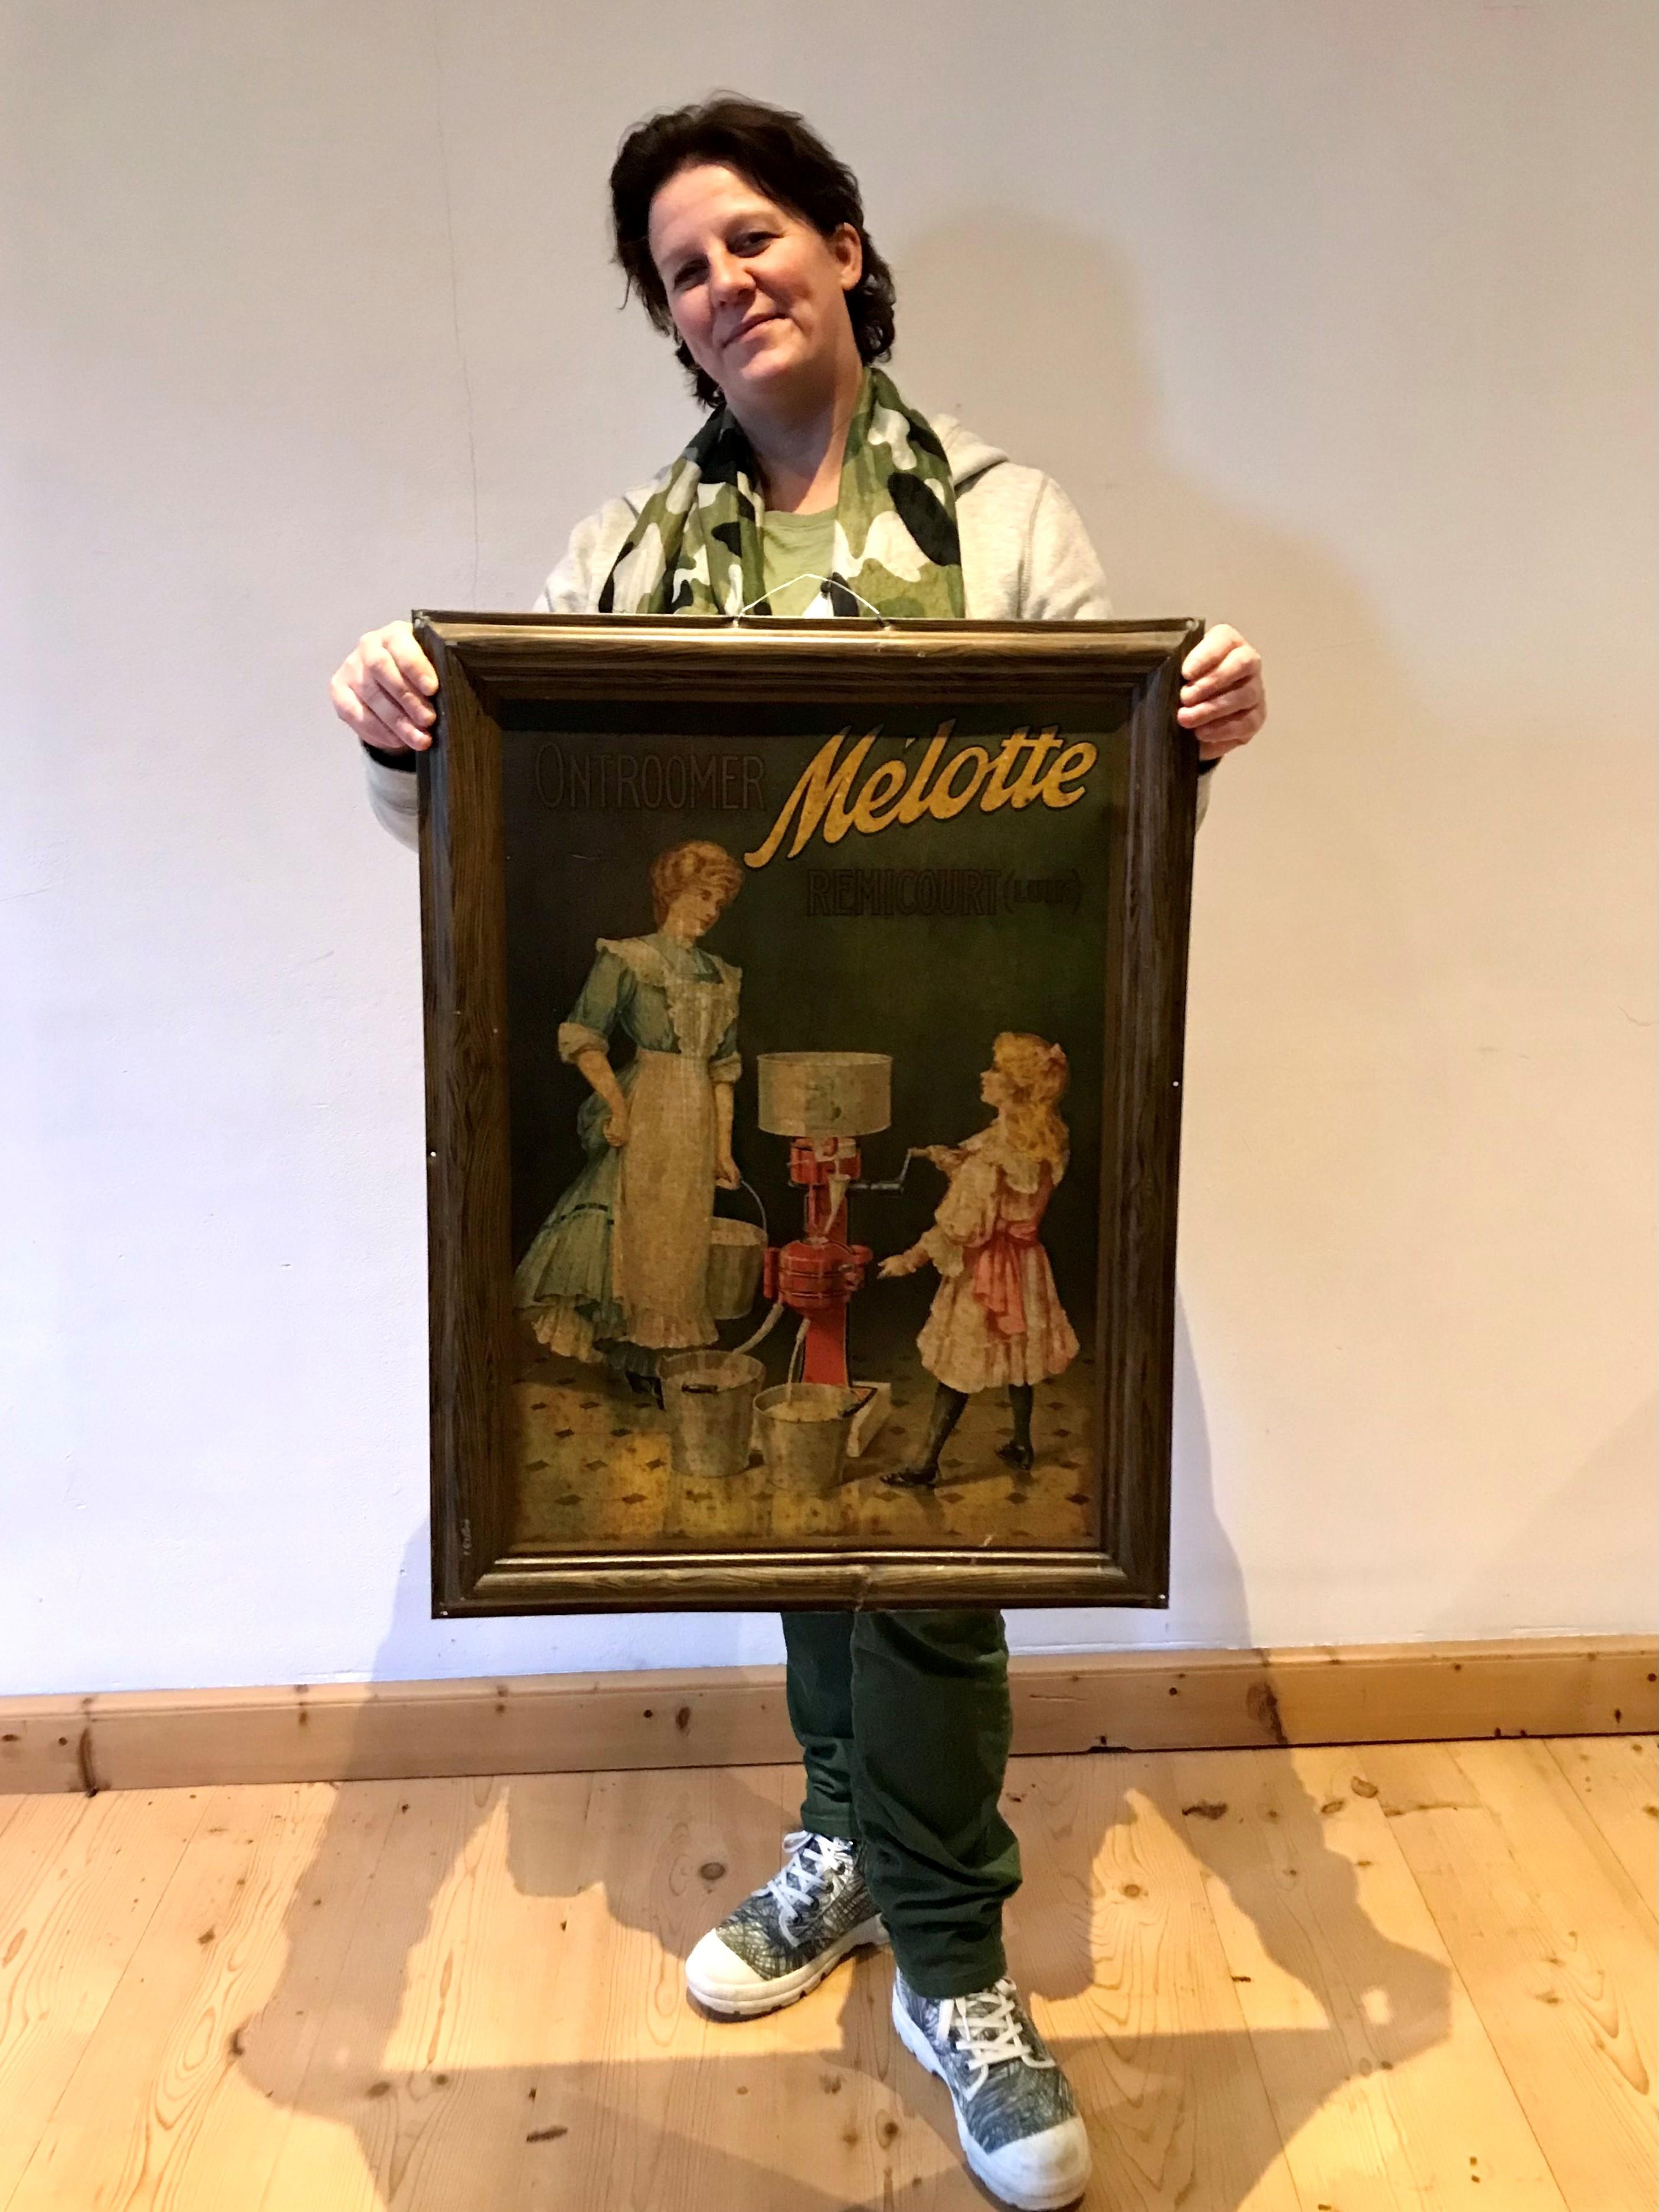 Antique large tin sign for the Belgian cream separator brand Mélotte, which was based in Belgium in Remicourt in the province Luik - LIège. 
This large advertising sign dates circa 1900-1920. 
It has a beautiful design: a woman and daughter